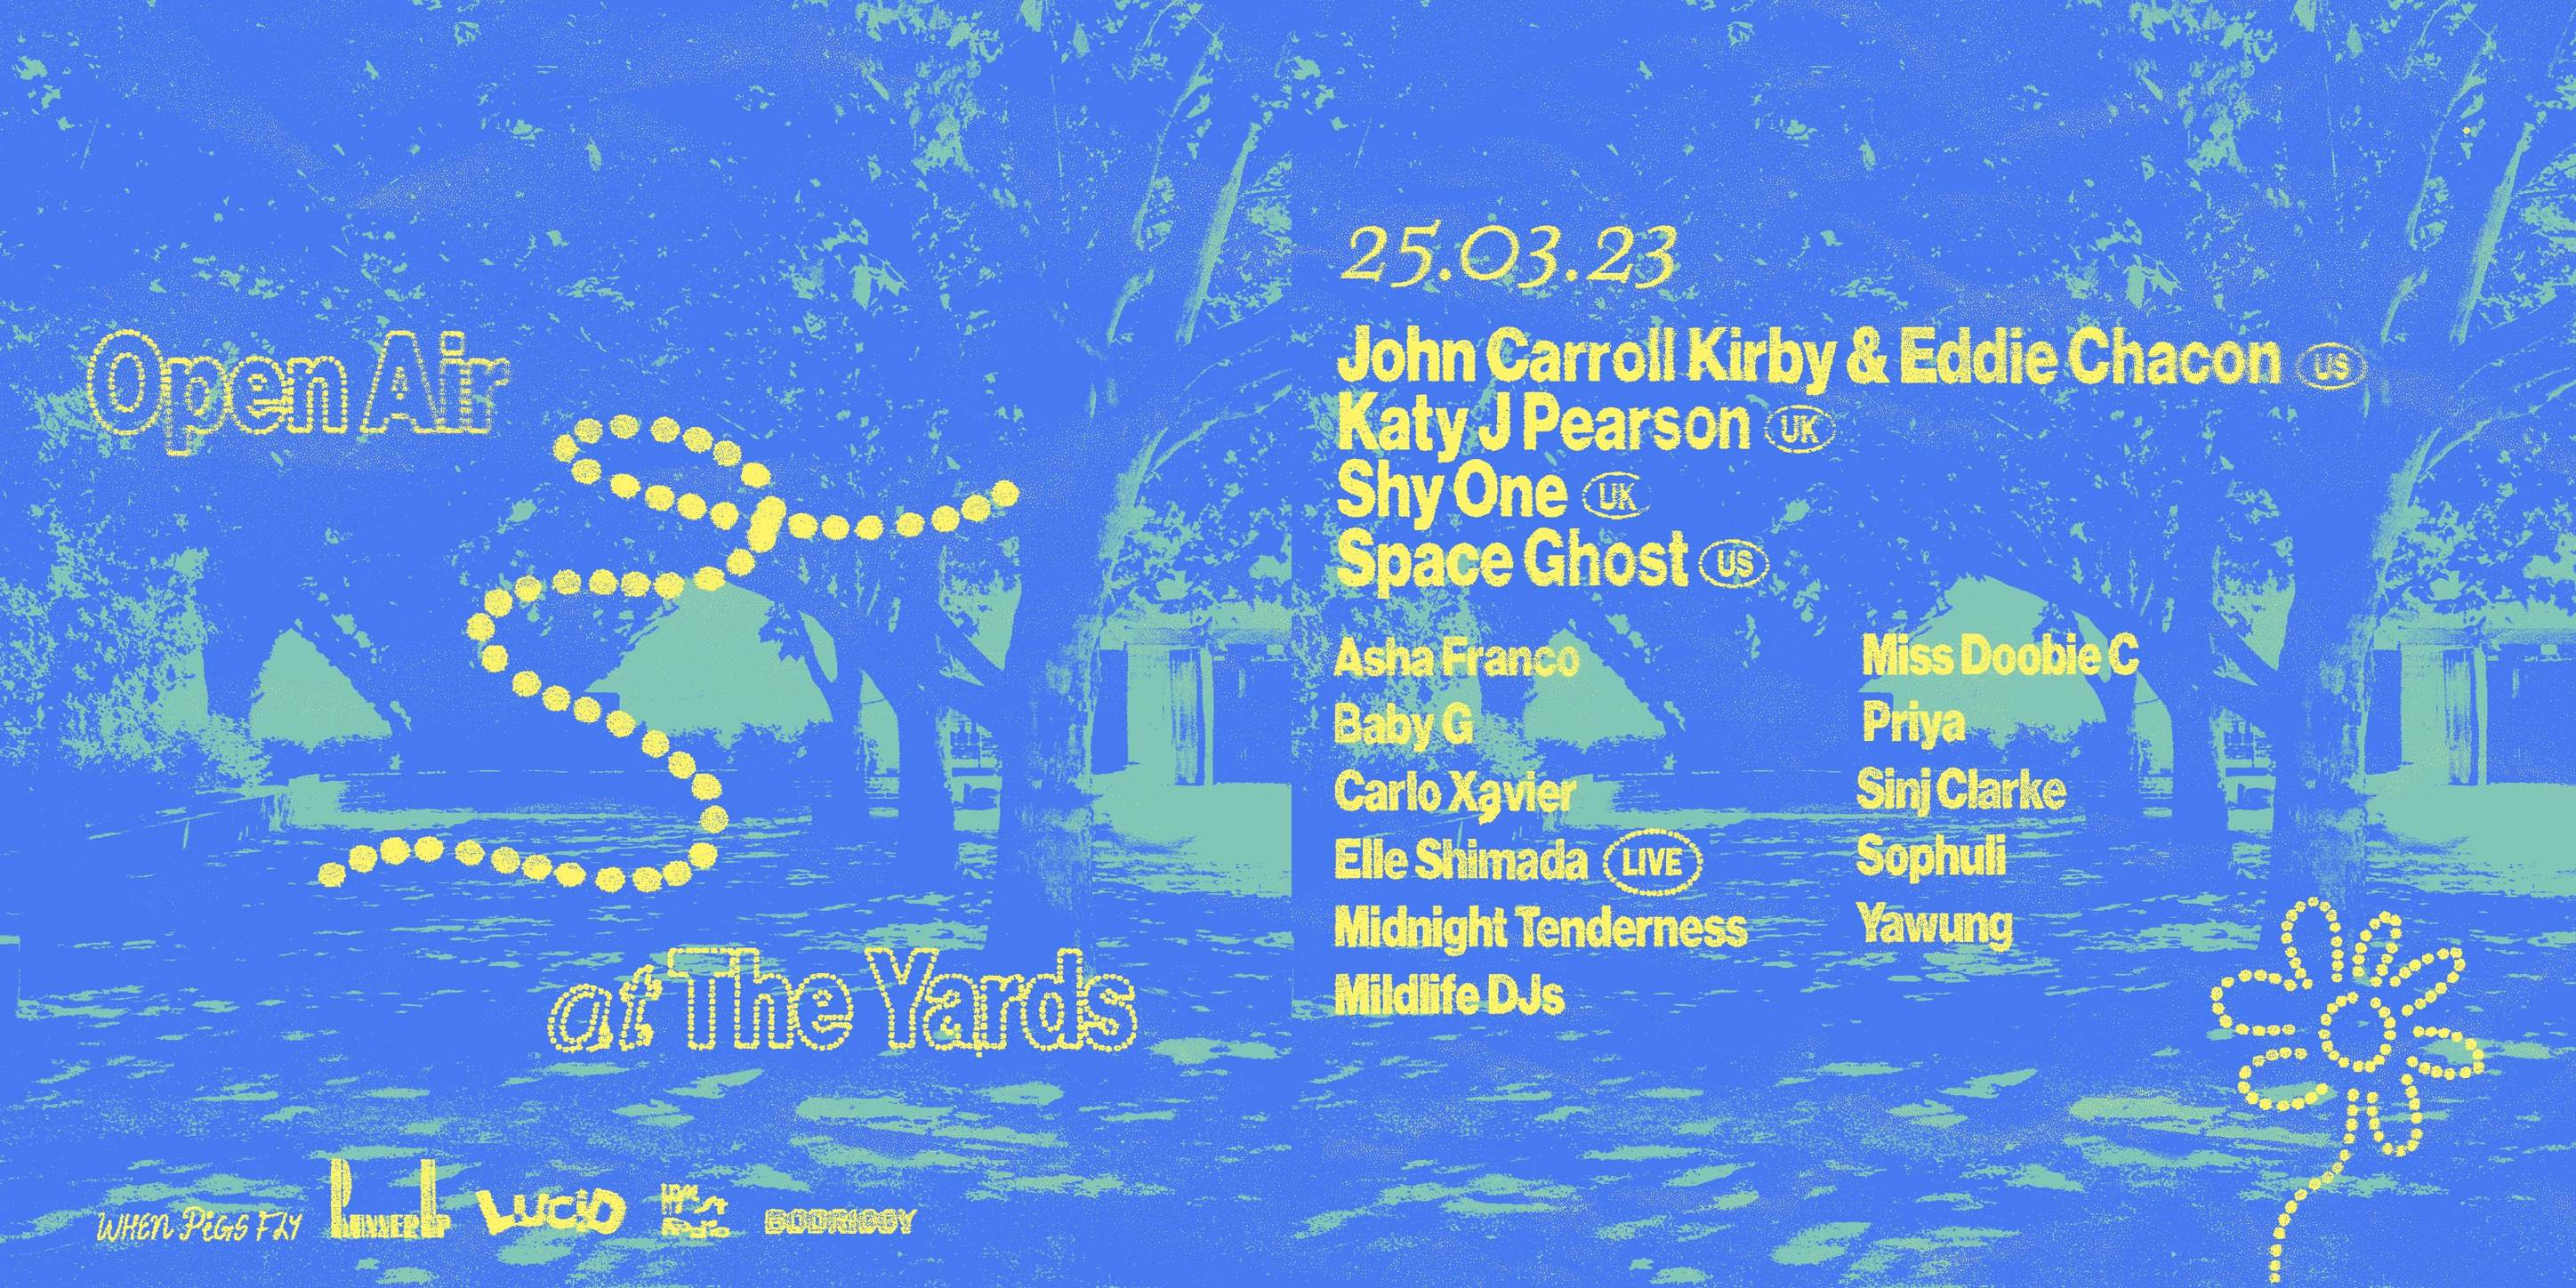 Open Air at The Yards feat. John Carroll Kirby & Eddie Chacon + More. - Página frontal